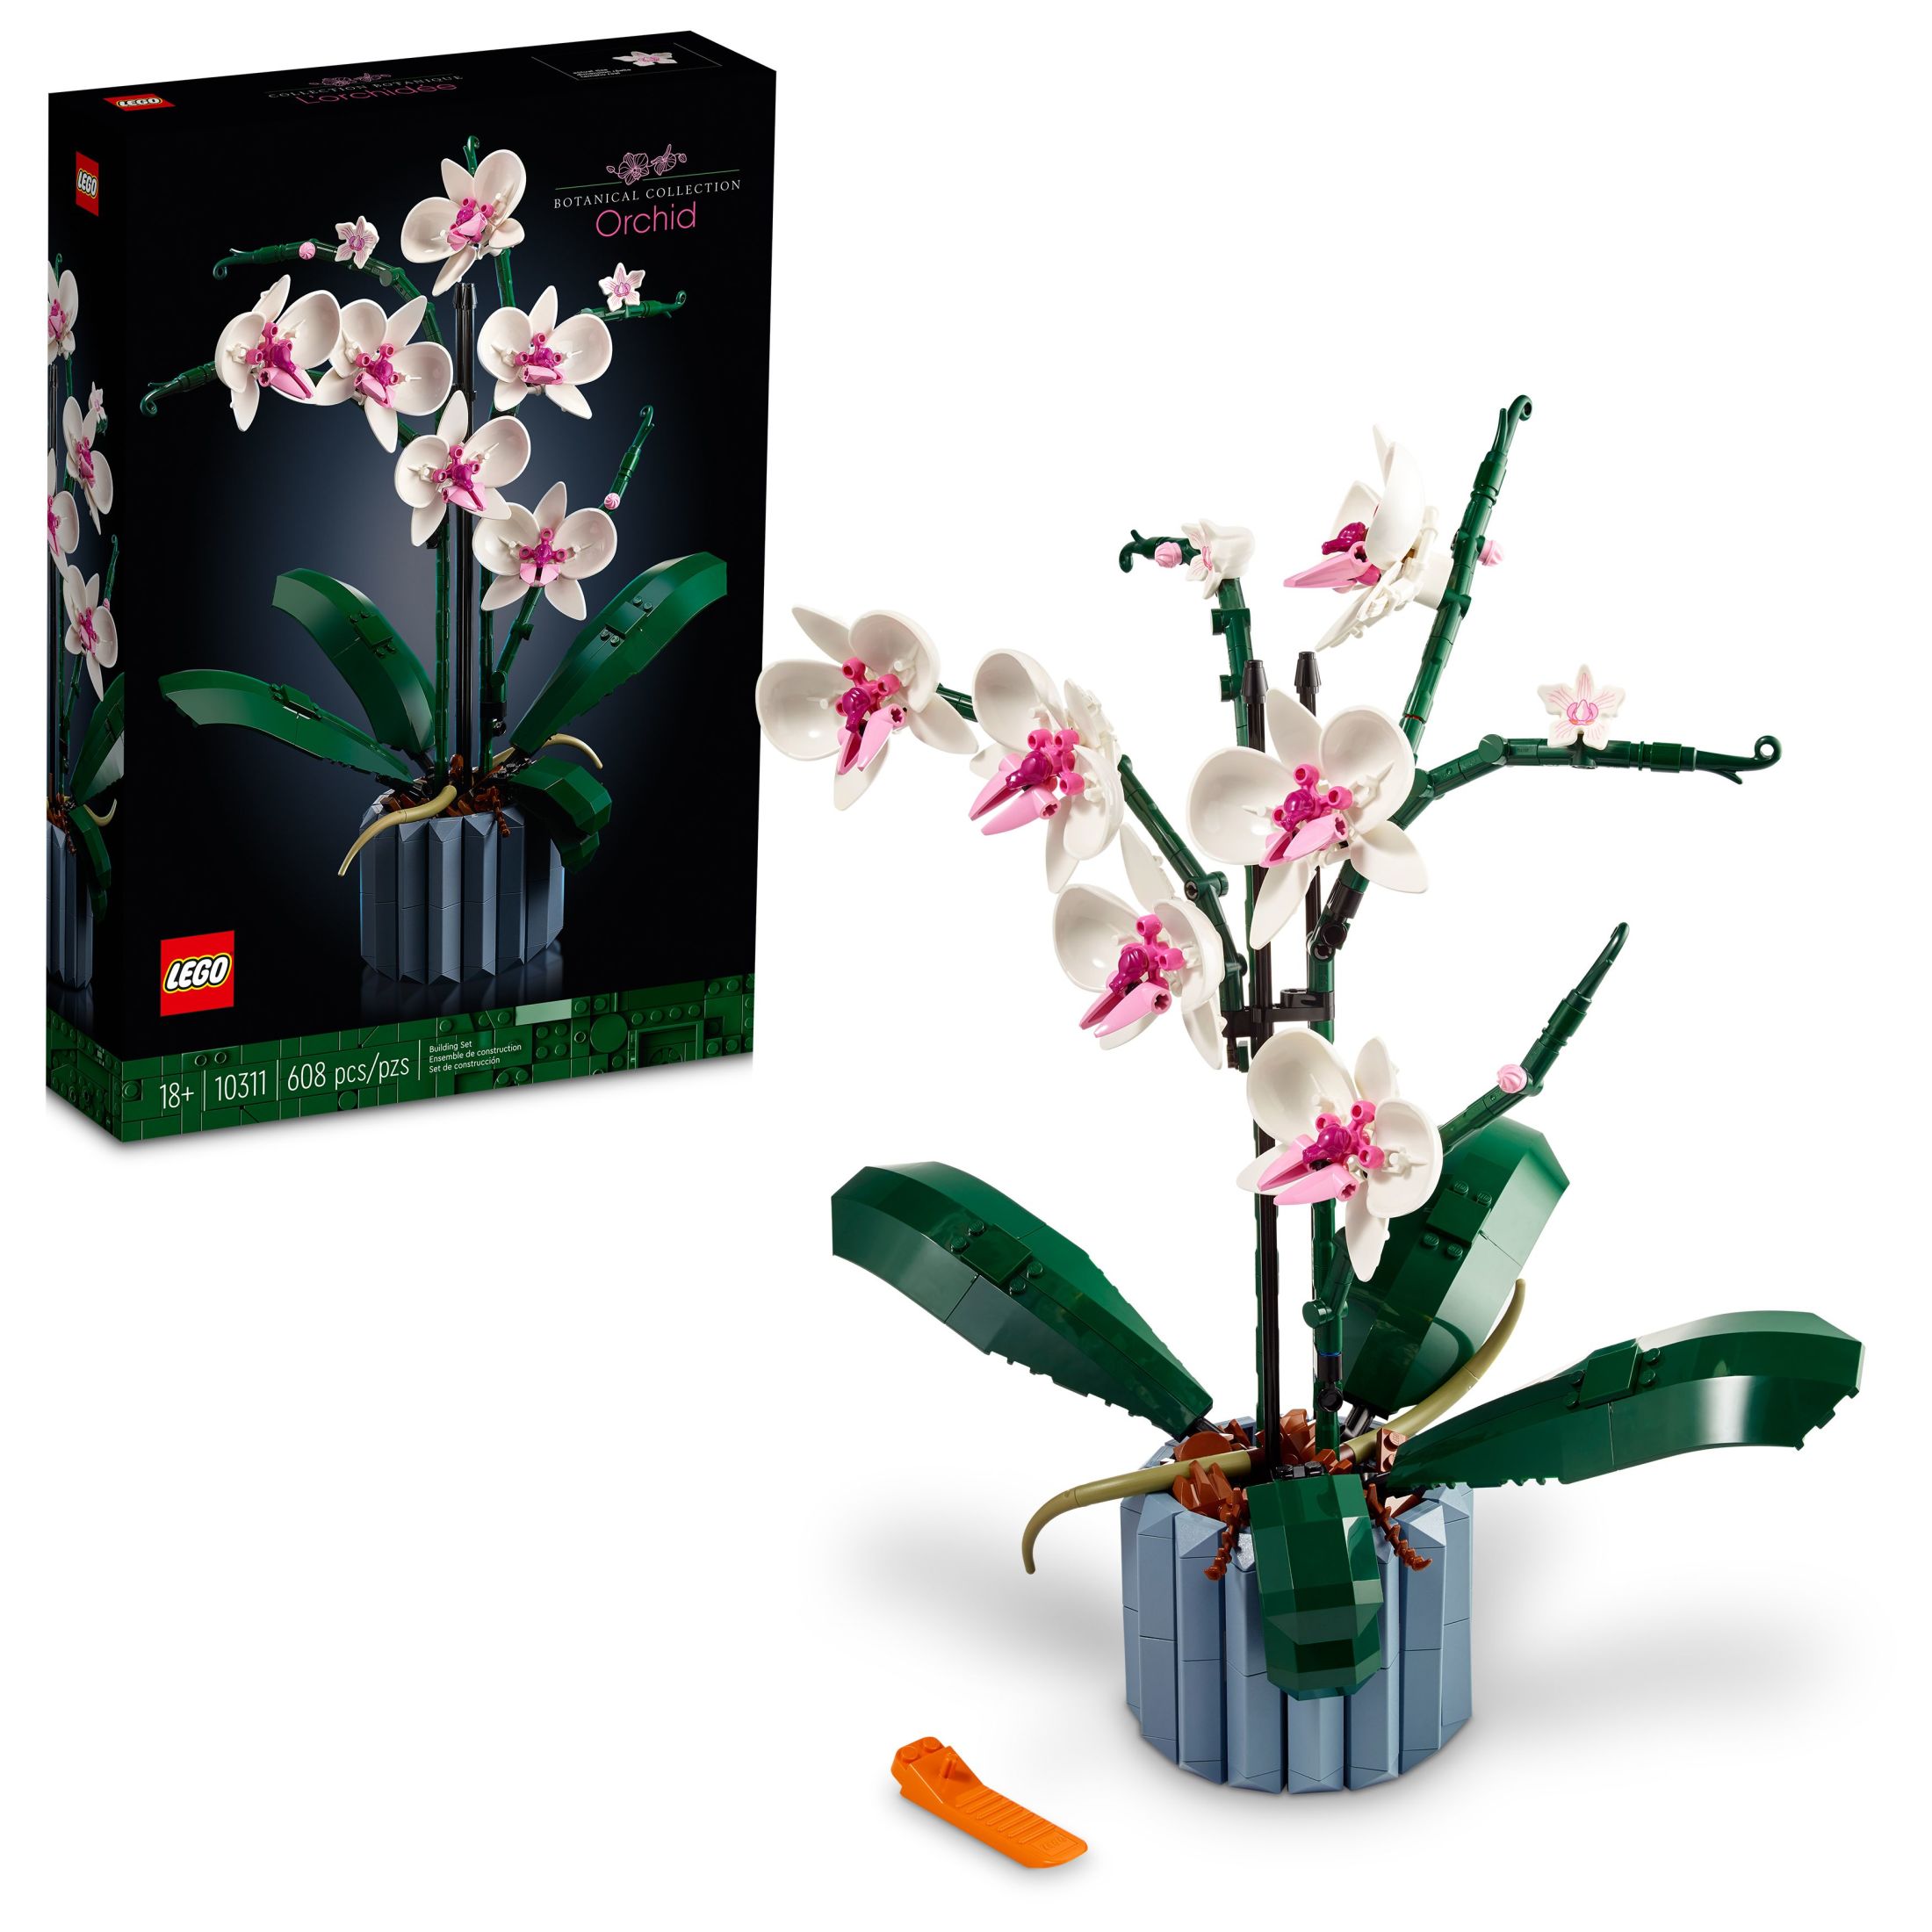 LEGO Icons Orchid Artificial Plant, Building Set with Flowers, Mother's Day Decoration, Botanical Collection, Great Gift for Birthday, Anniversary, or Mother's Day, 10311 - image 1 of 8